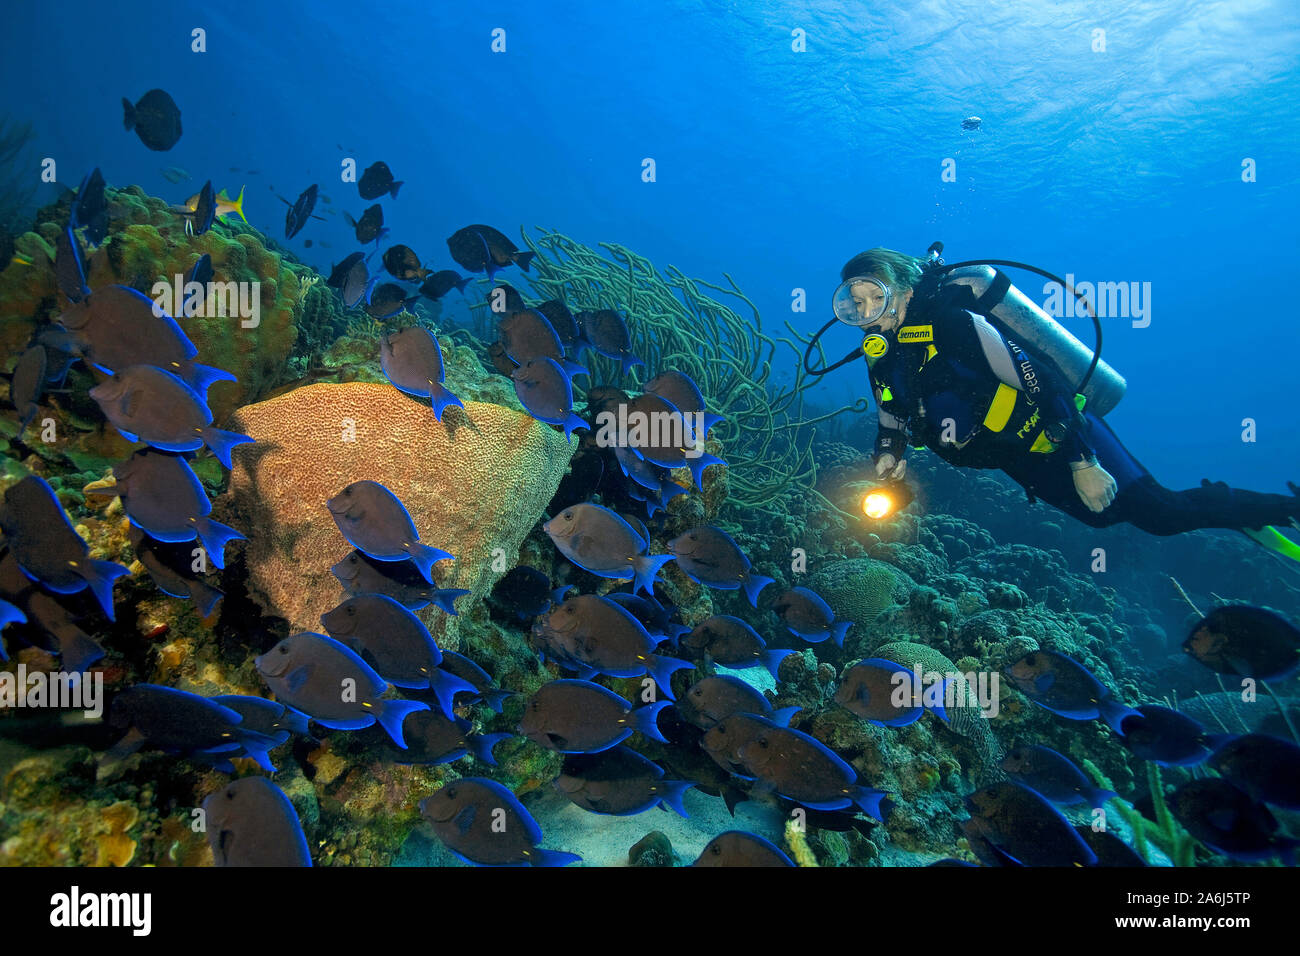 Scuba diver watches Blue Tang (Acanthurus coeruleus), feeding algs from corals, caribbean coral reef, Bonaire, Netherland Antilles Stock Photo